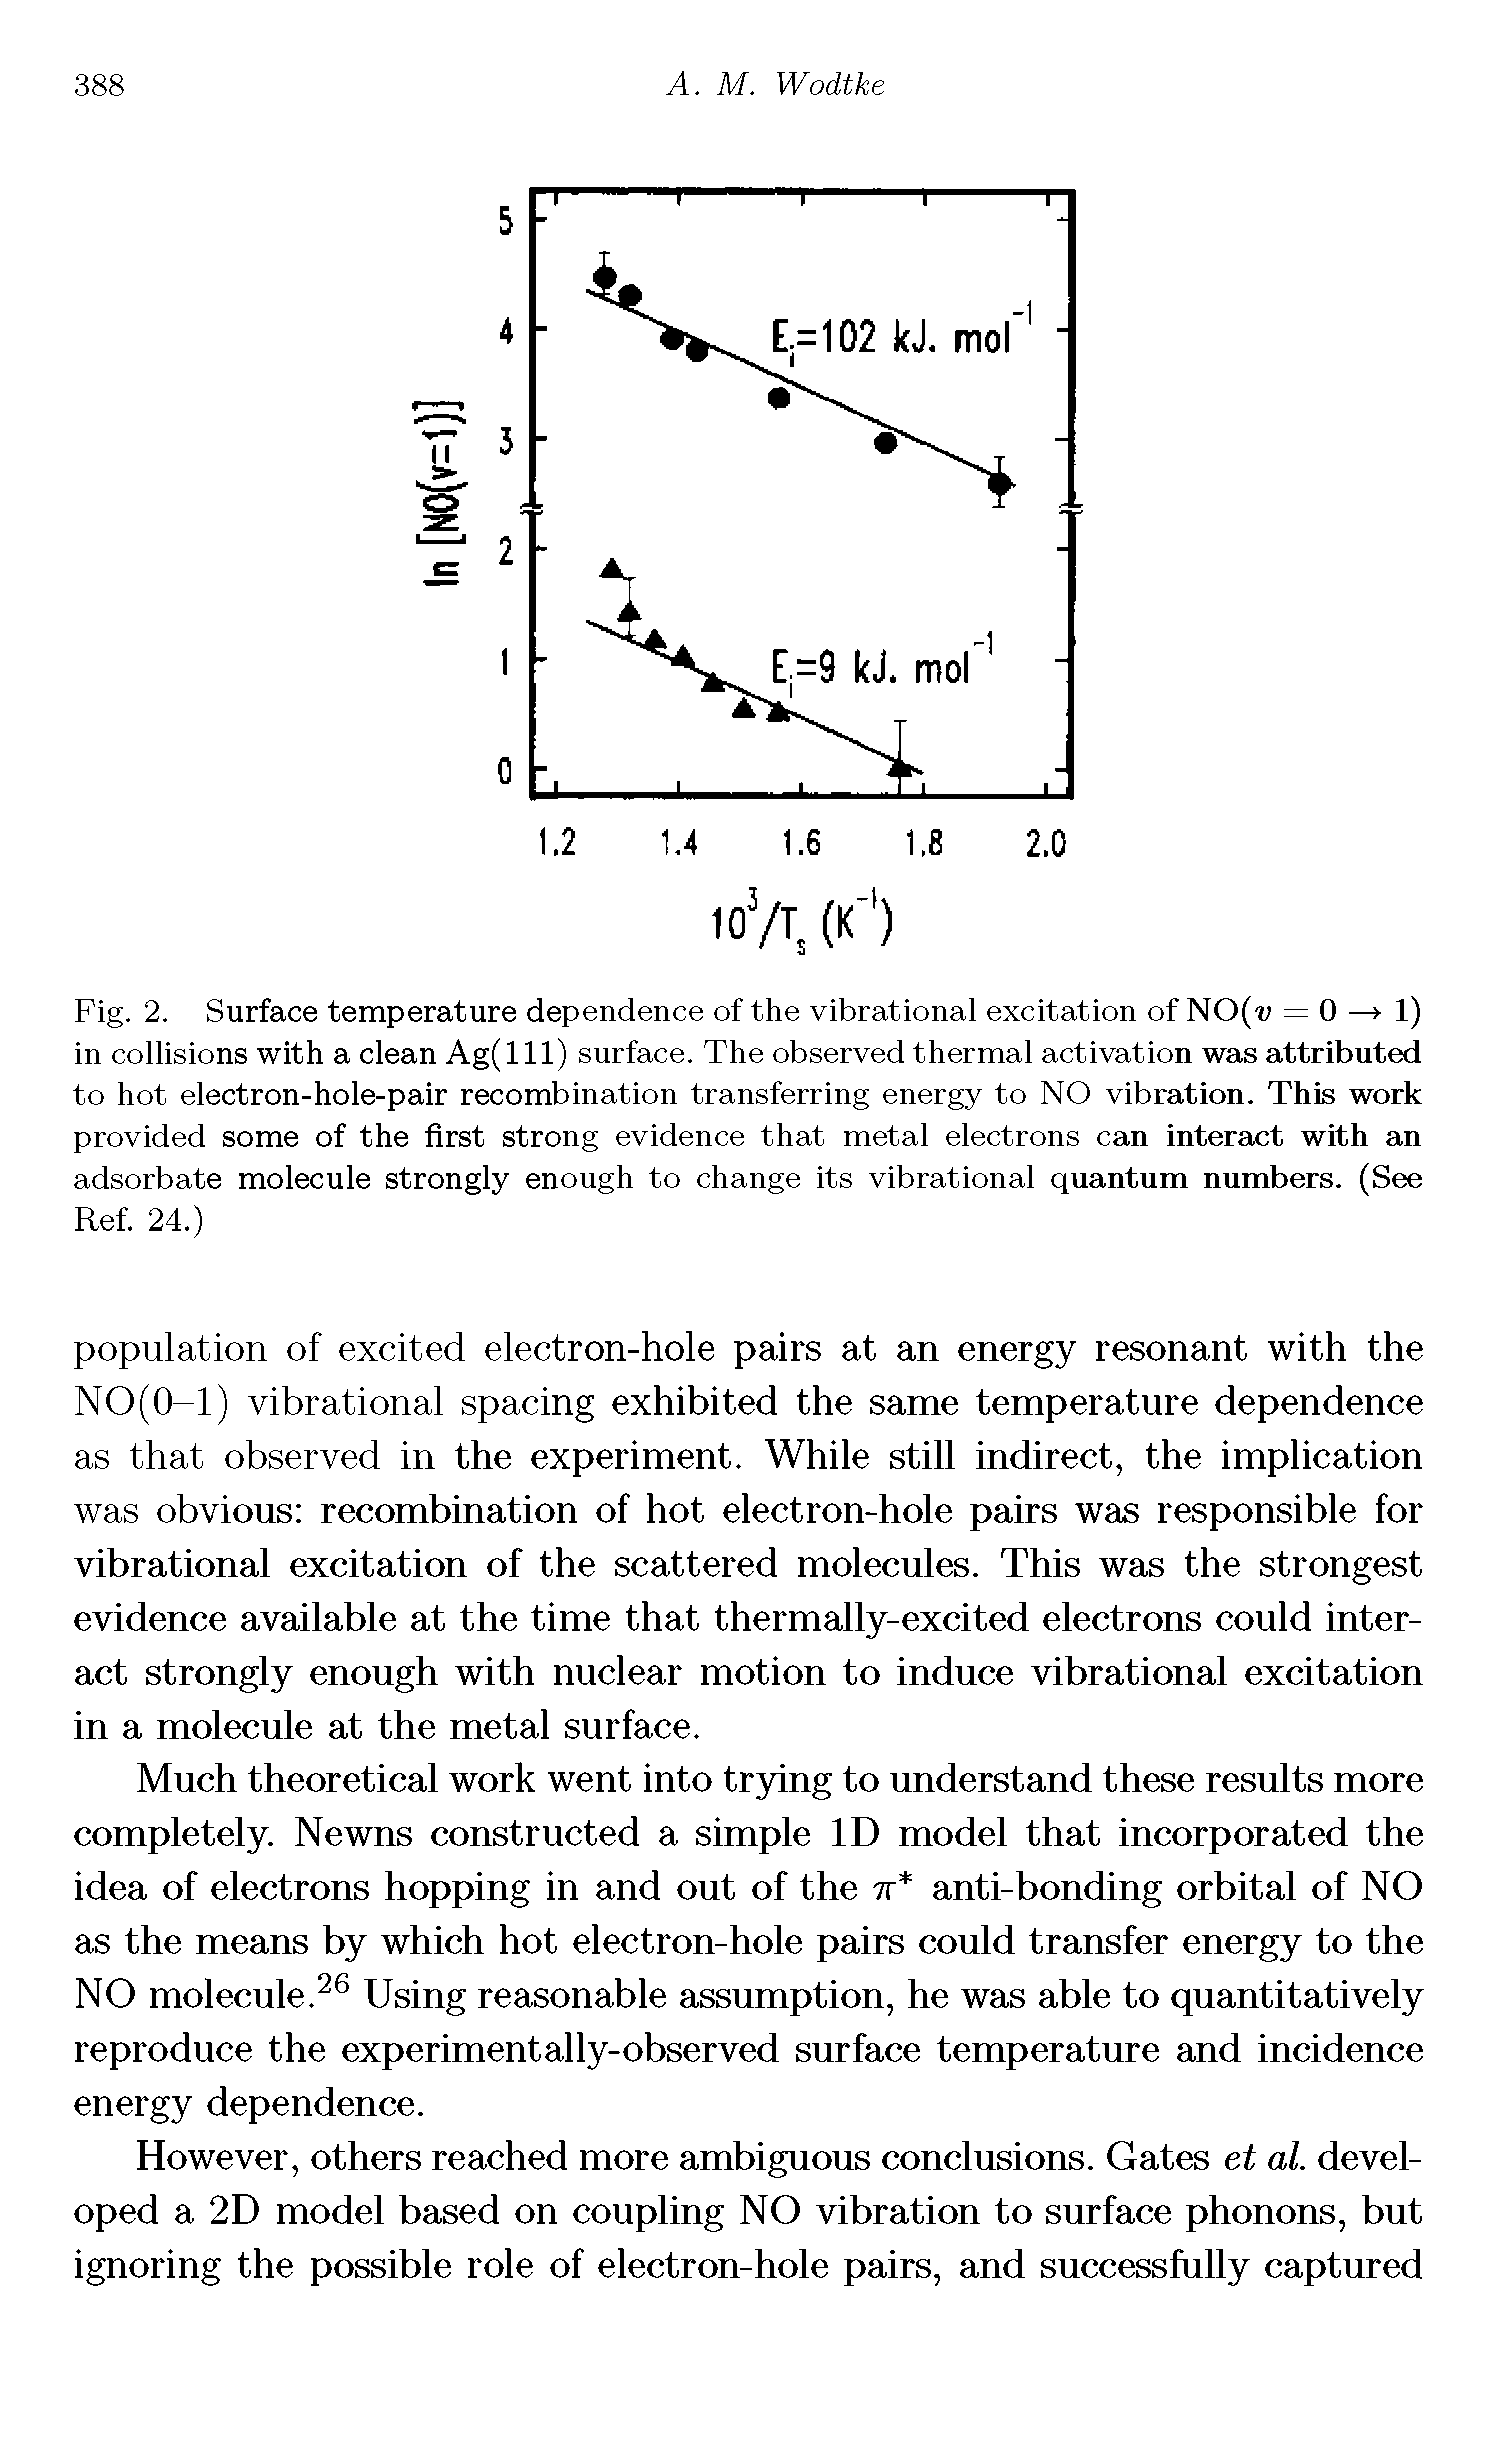 Fig. 2. Surface temperature dependence of the vibrational excitation of NO(v = 0 — 1) in collisions with a clean Ag(lll) surface. The observed thermal activation was attributed to hot electron-hole-pair recombination transferring energy to NO vibration. This work provided some of the first strong evidence that metal electrons can interact with an adsorbate molecule strongly enough to change its vibrational quantum numbers. (See Ref. 24.)...